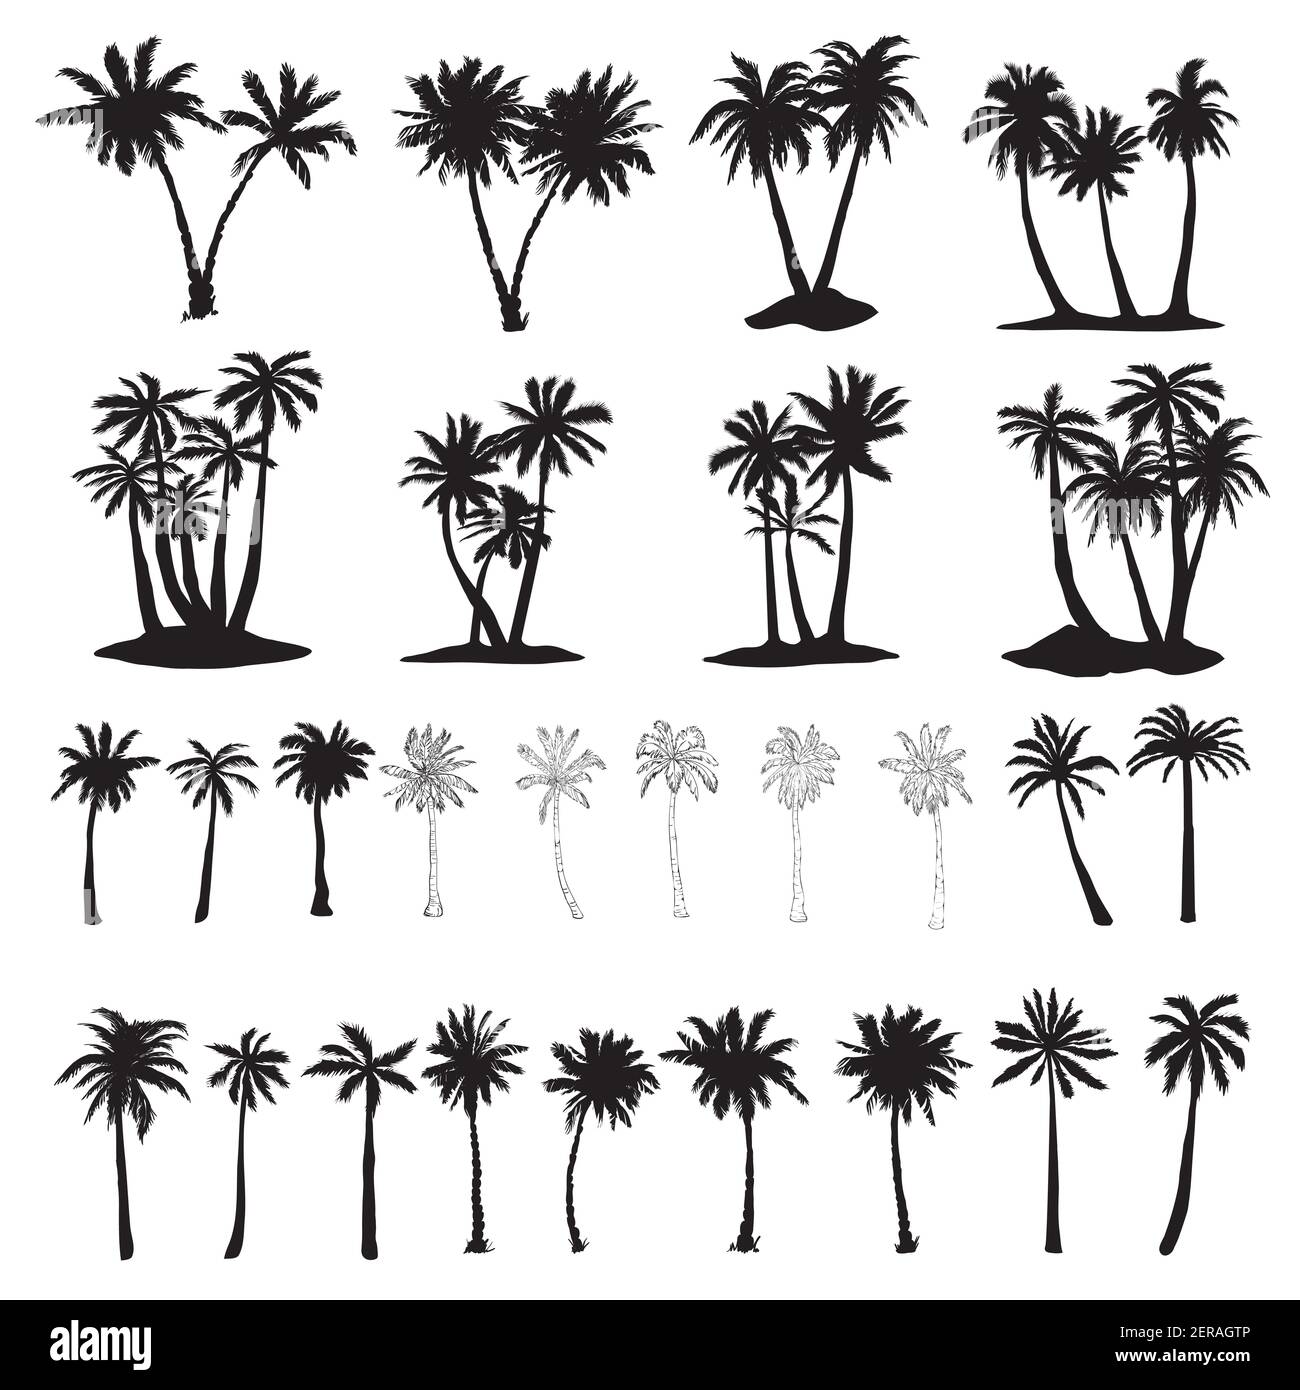 Set of palm tree icons black silhouettes isolated tropical palm trees . Stock Vector